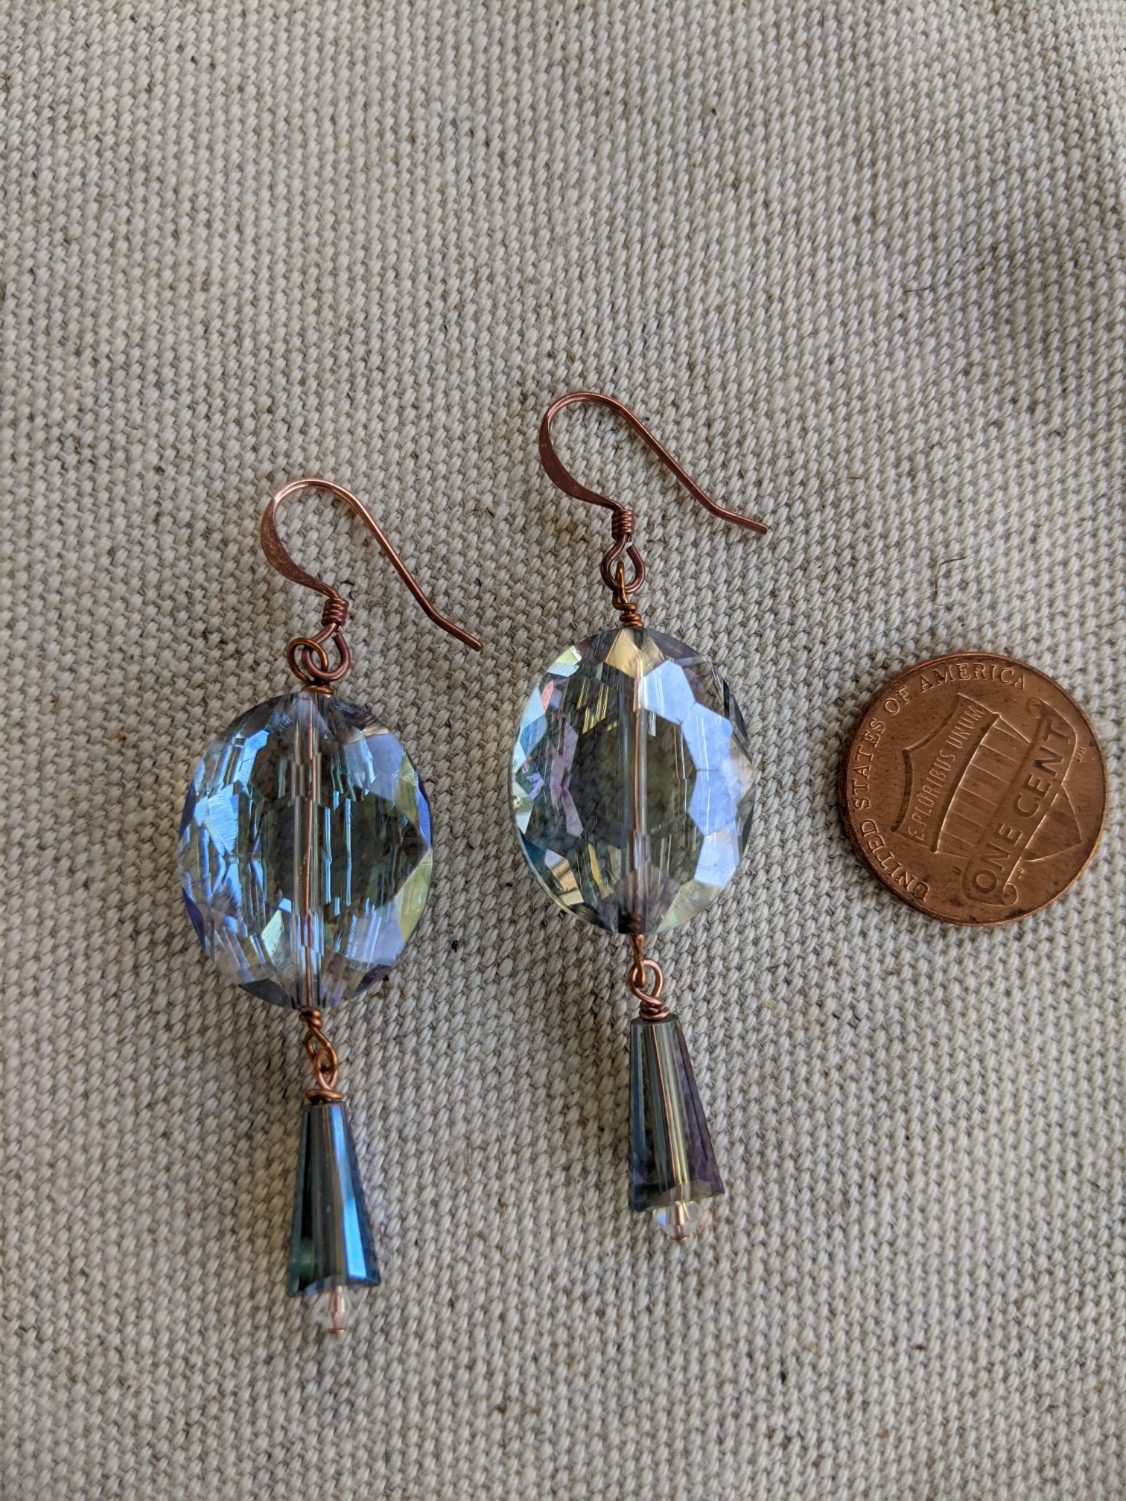 Handmade Blue Oval Earrings with Dangling Cone Shaped Crystals – Bali ...